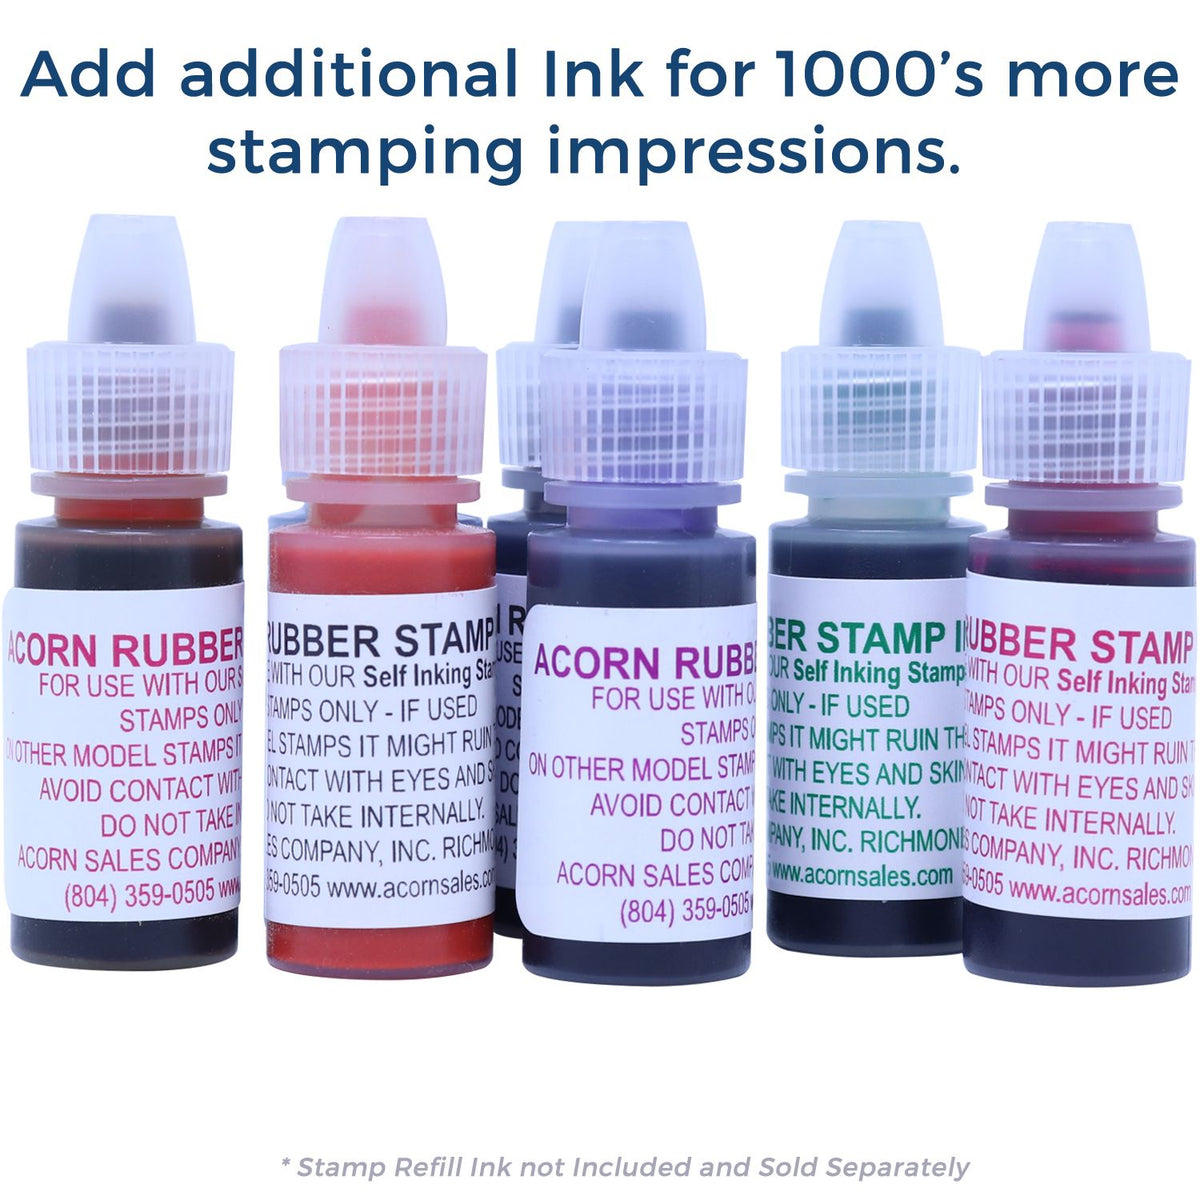 Refill Ink for Self-Inking Round Entered Entered Stamp Available